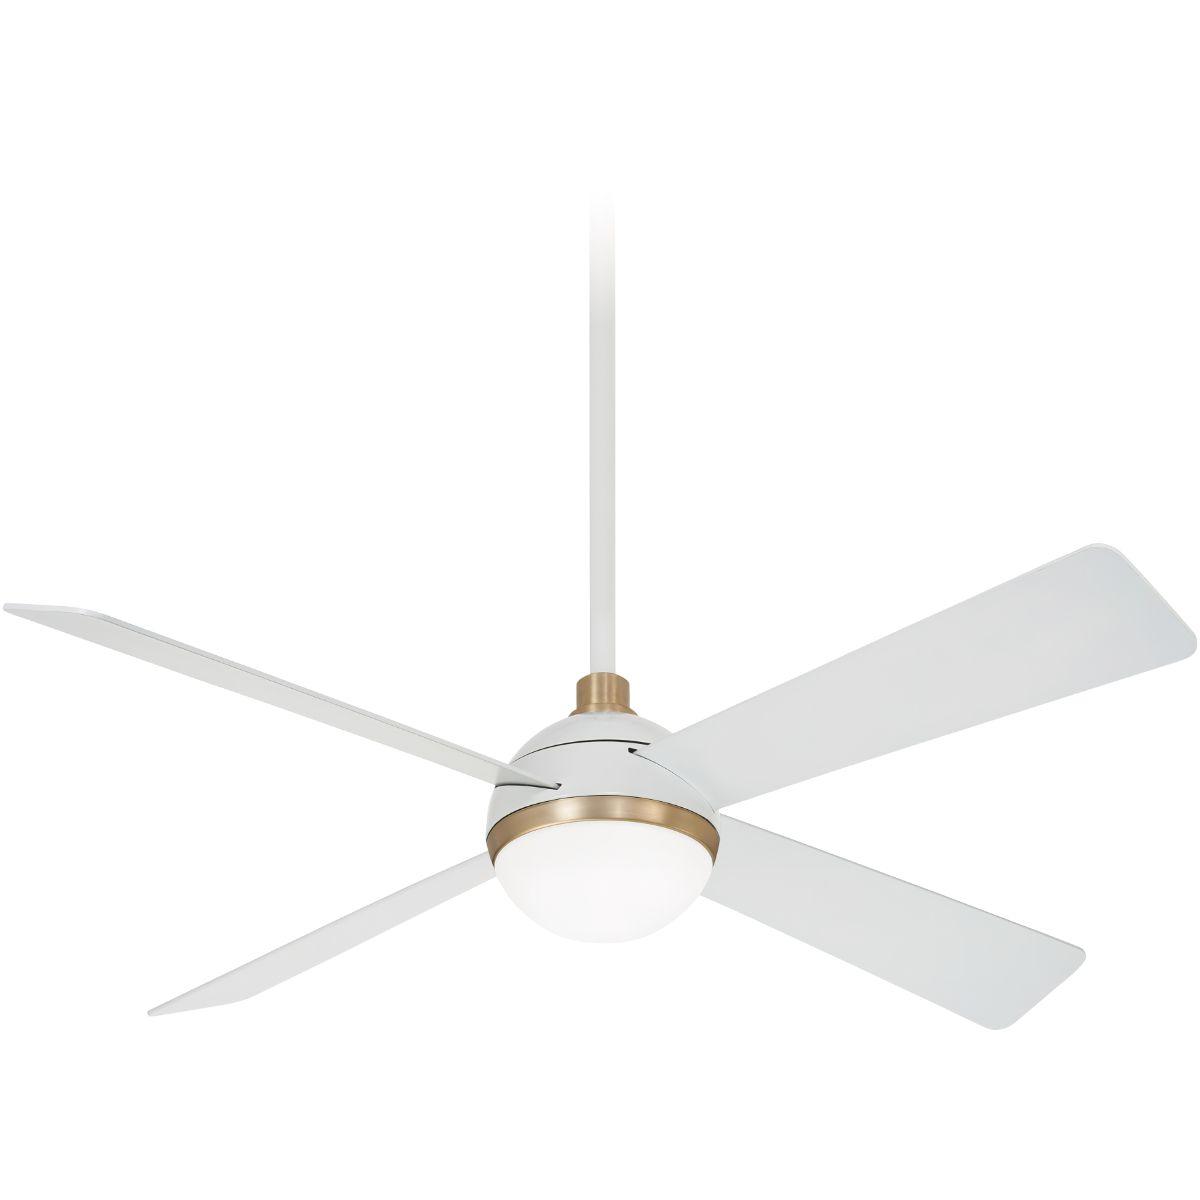 Orb 54 Inch Modern Ceiling Fan With Light And Remote